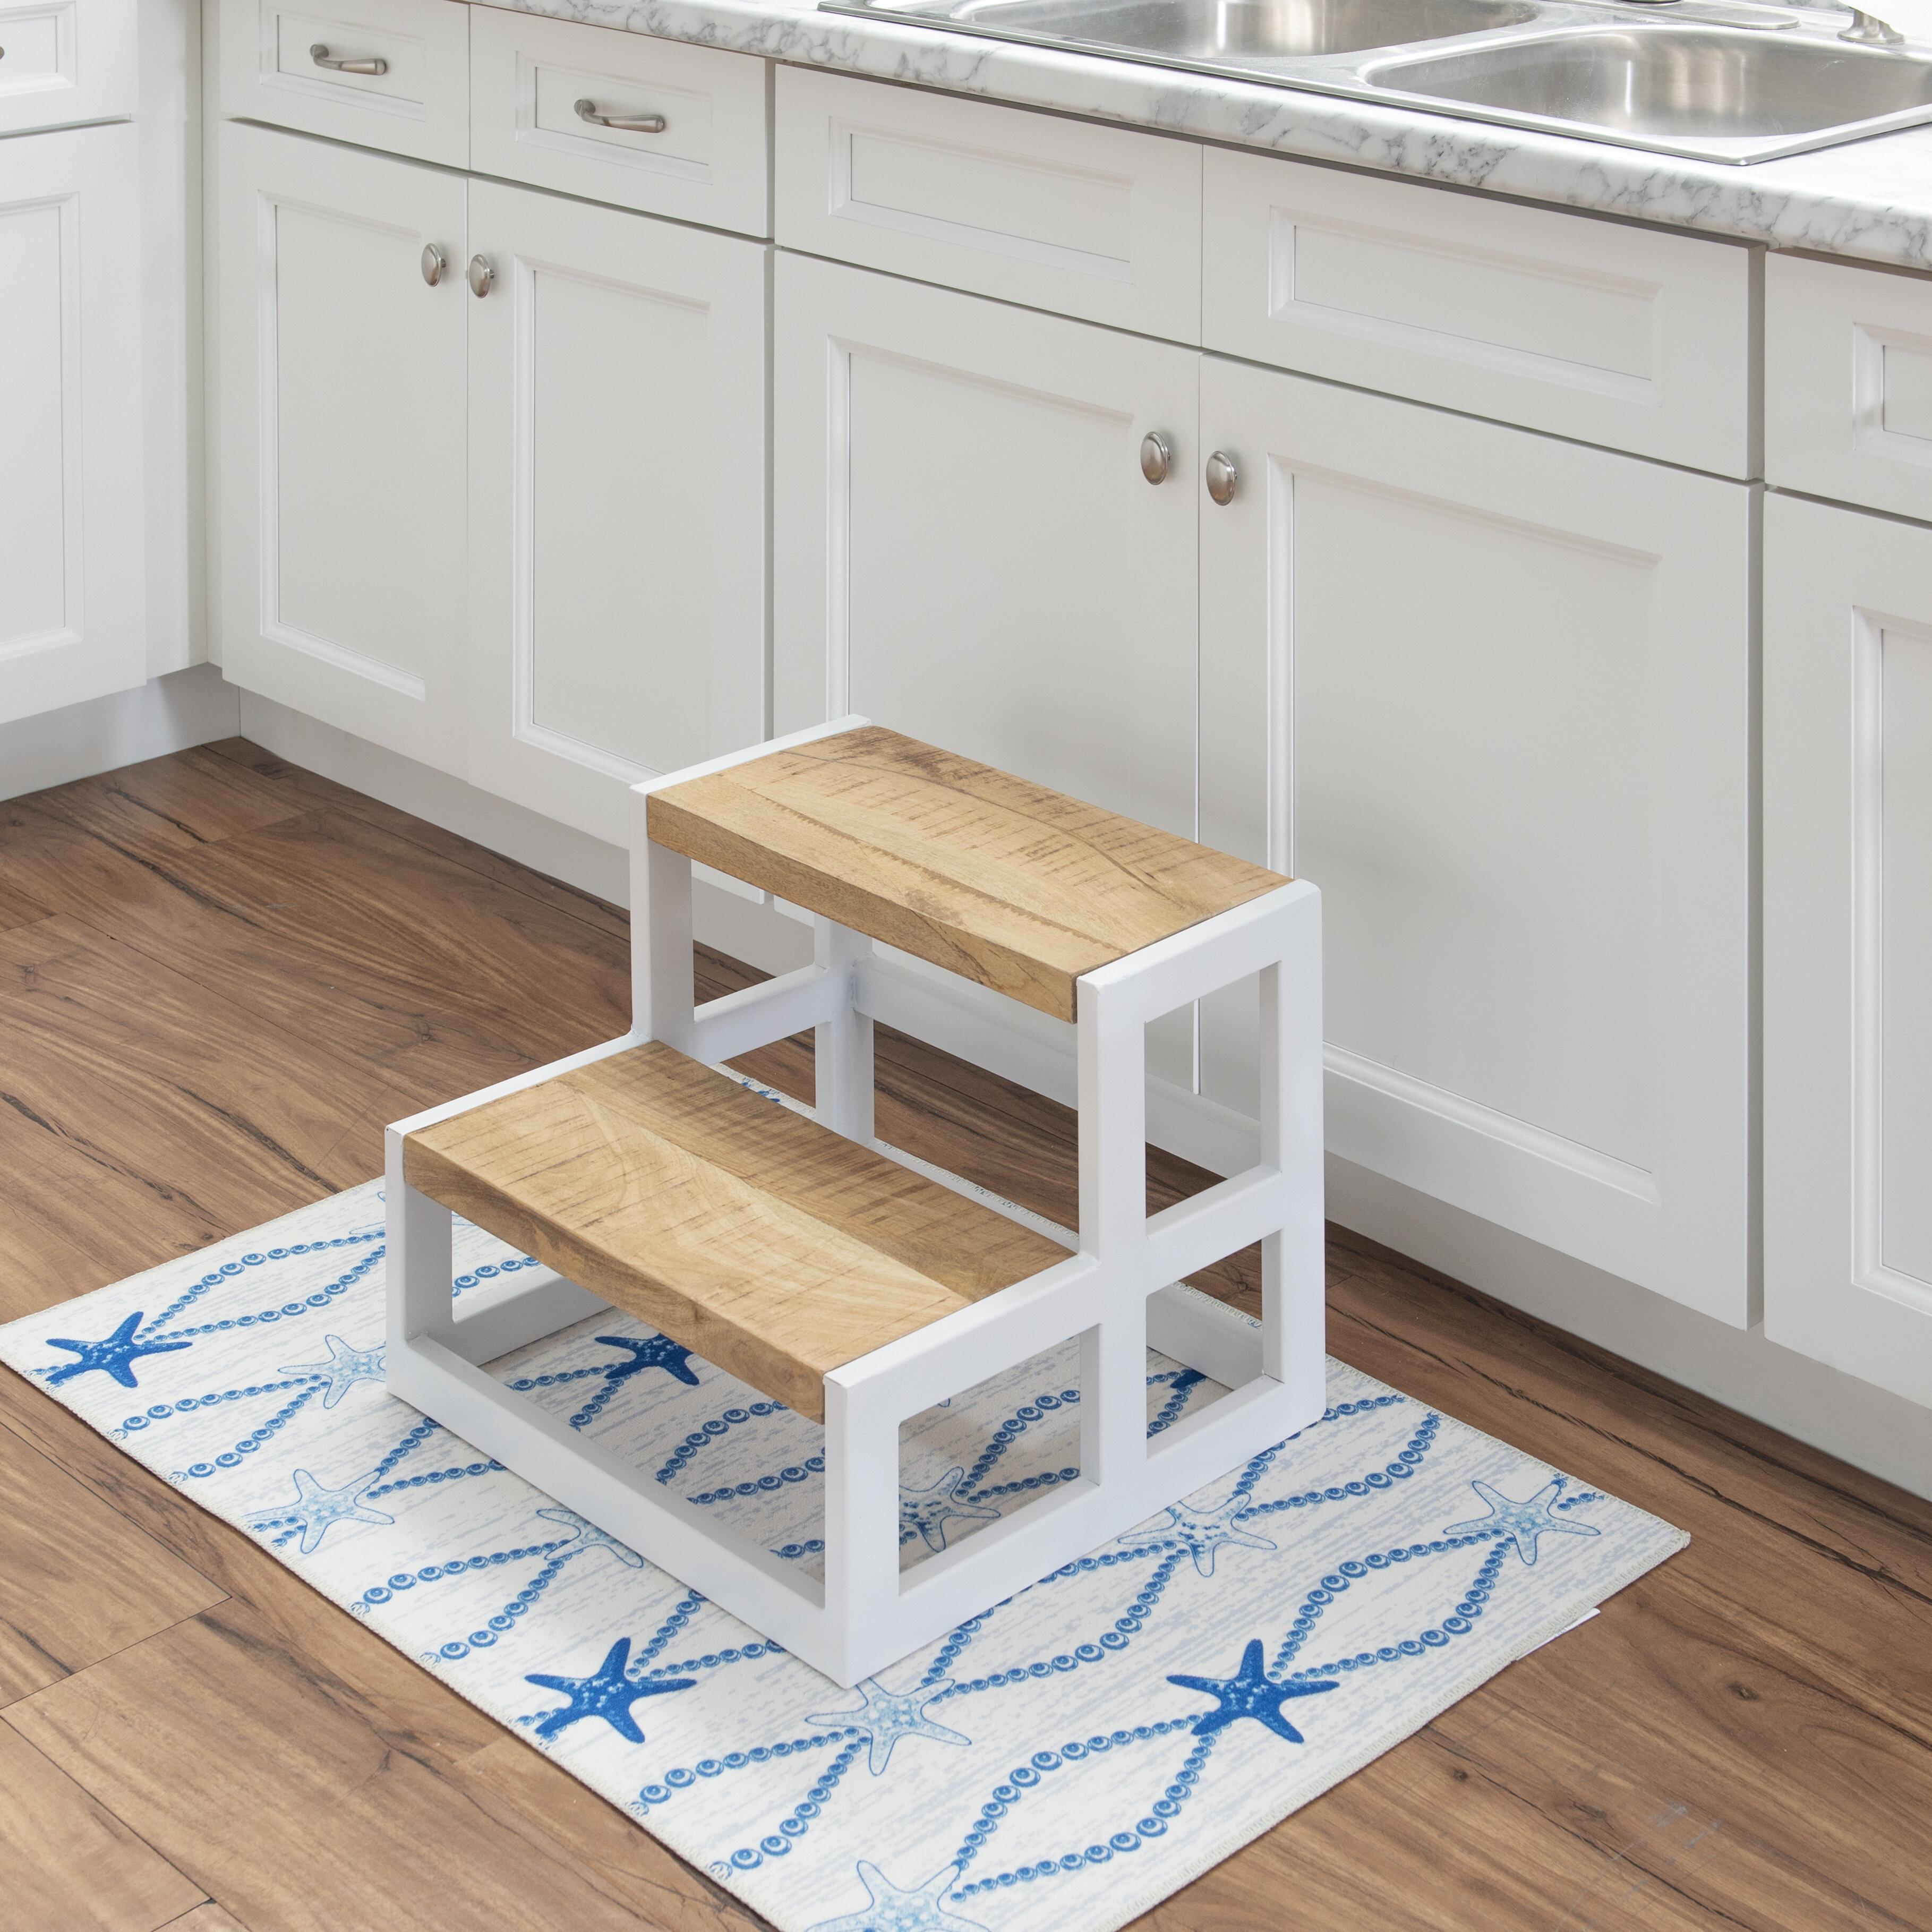 Add Color to an Unfinished Wood Step Stool